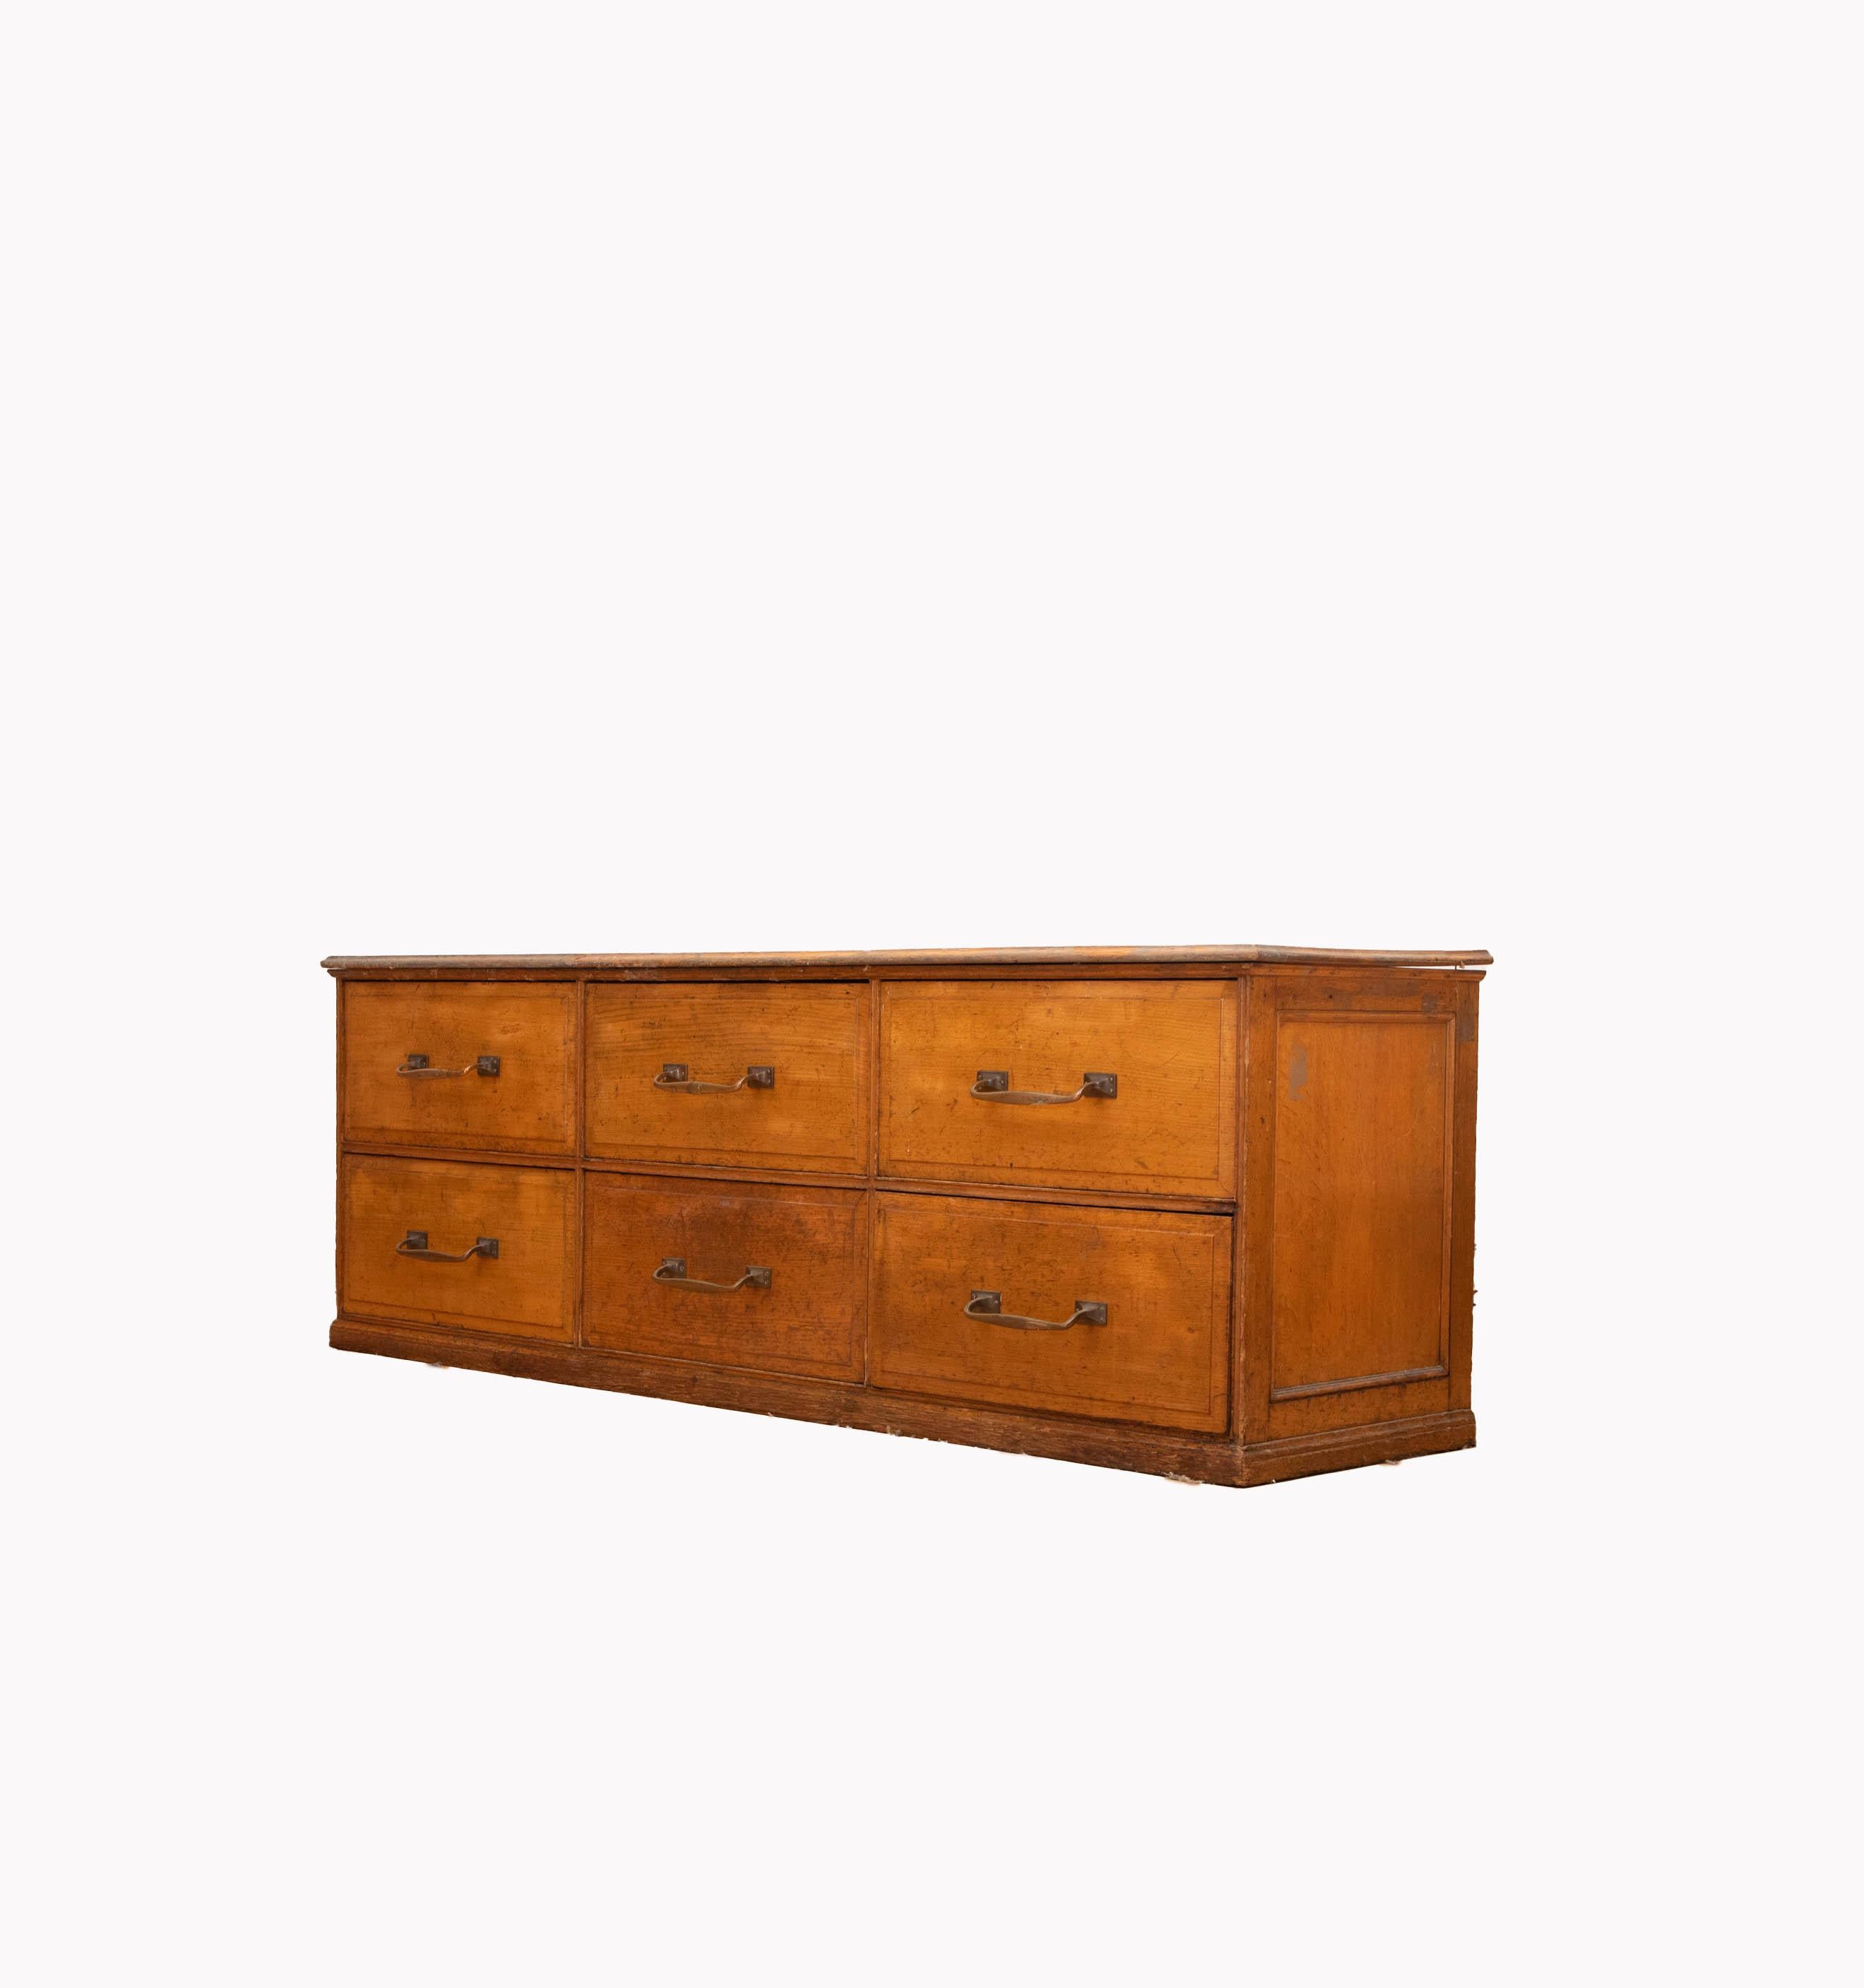 Great set of vintage, early  1900s haberdashery drawers from an old textile factory. 
Solid wooden top, sides and drawers, with brass handles. Pine clad back panel. 
Ideal kitchen island.
Perfect for retail or hospitality environment. 
We have